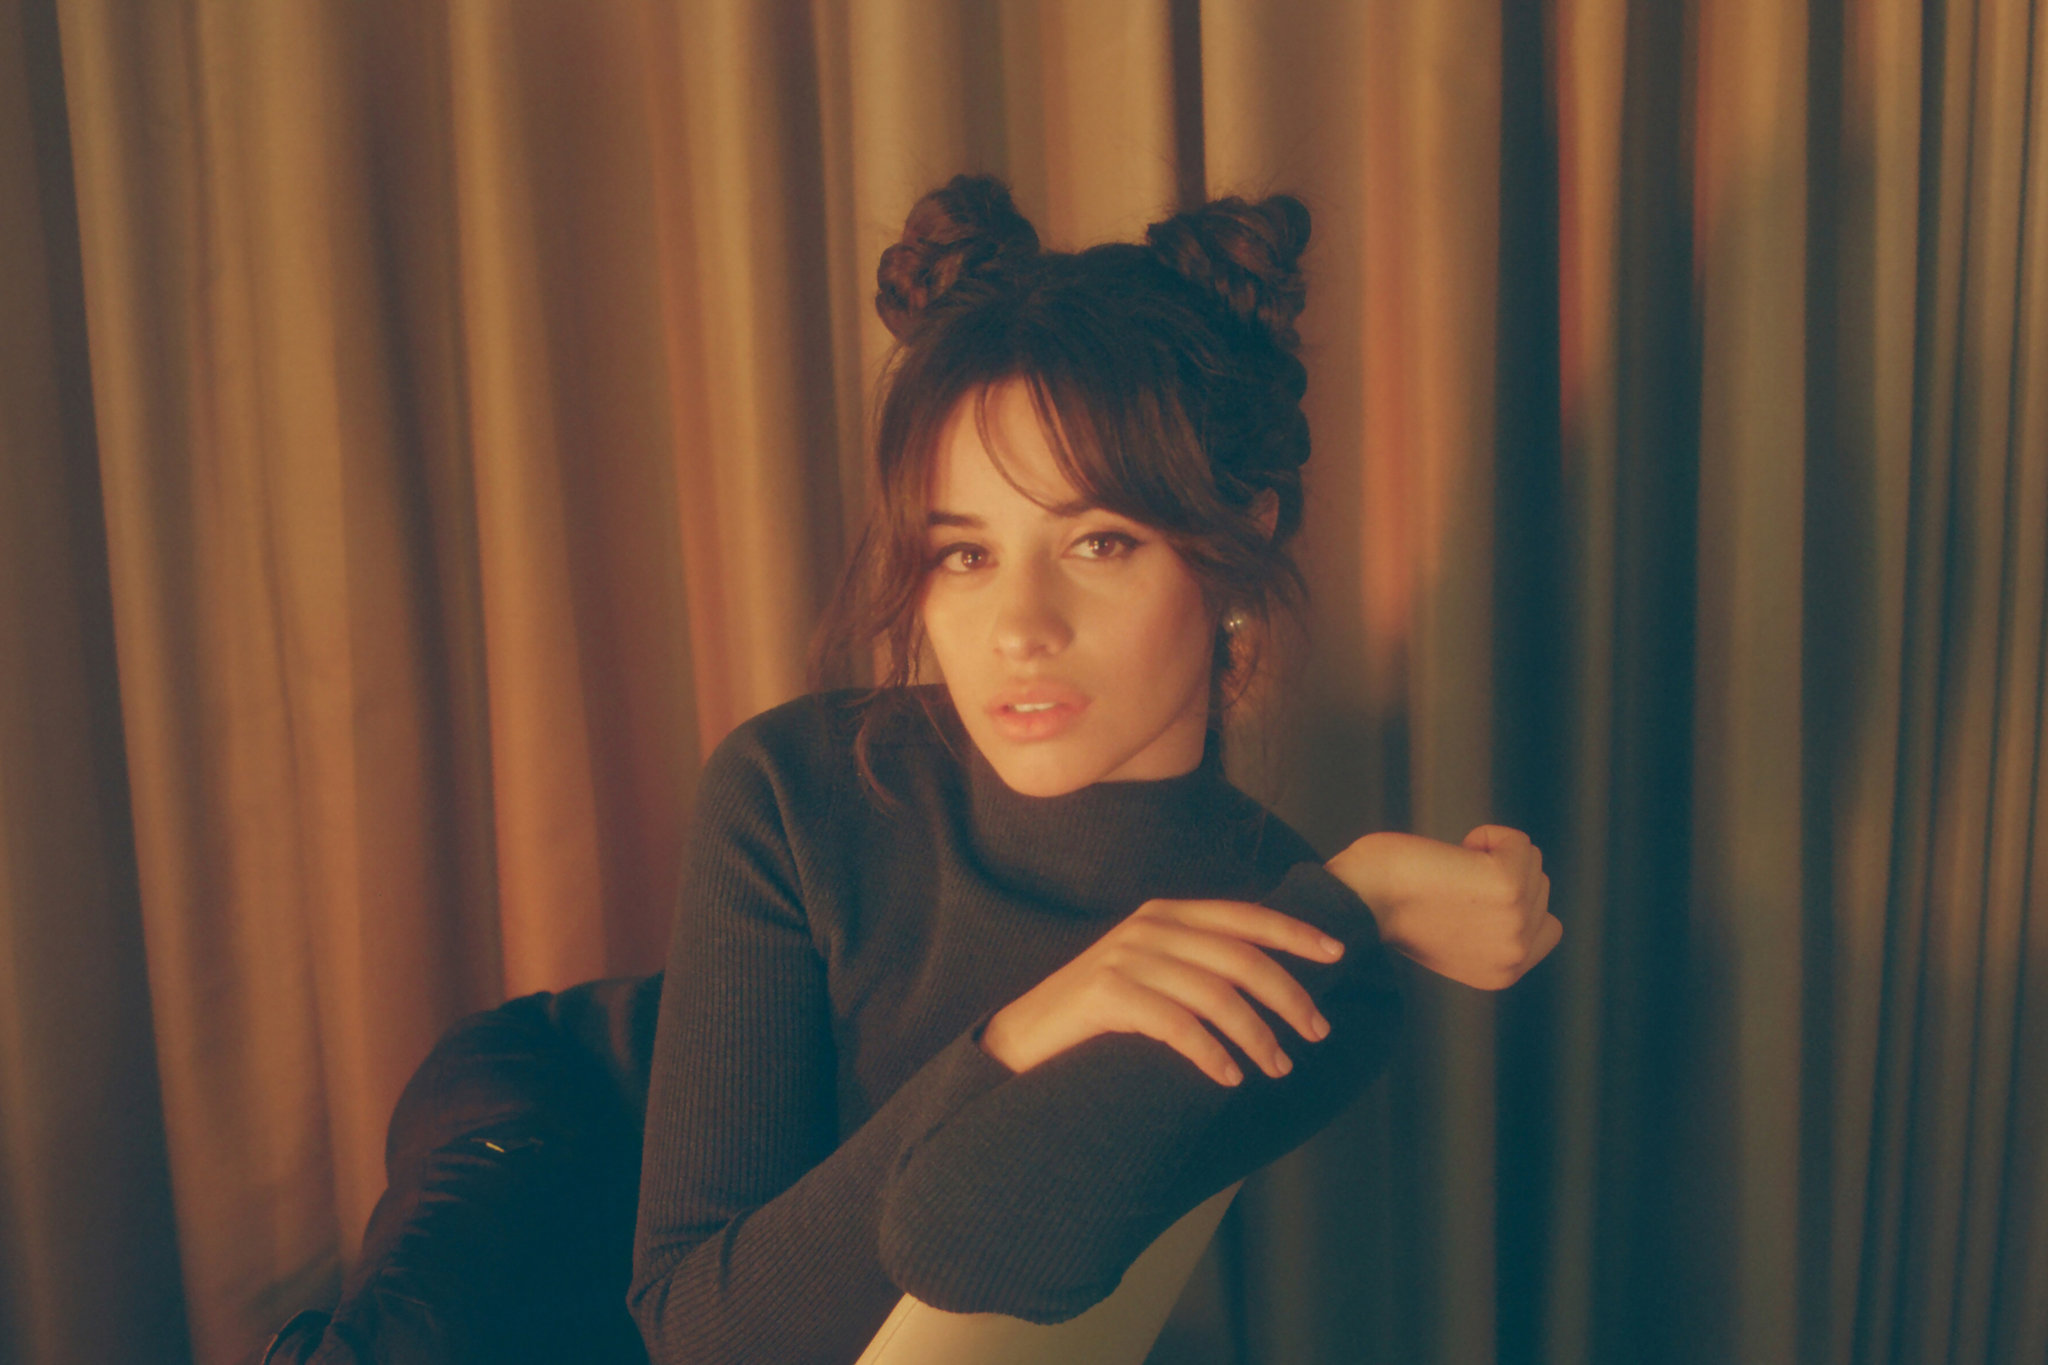 Camila Cabello Confirmed to Headline UEFA Champions League Final Opening Ceremony